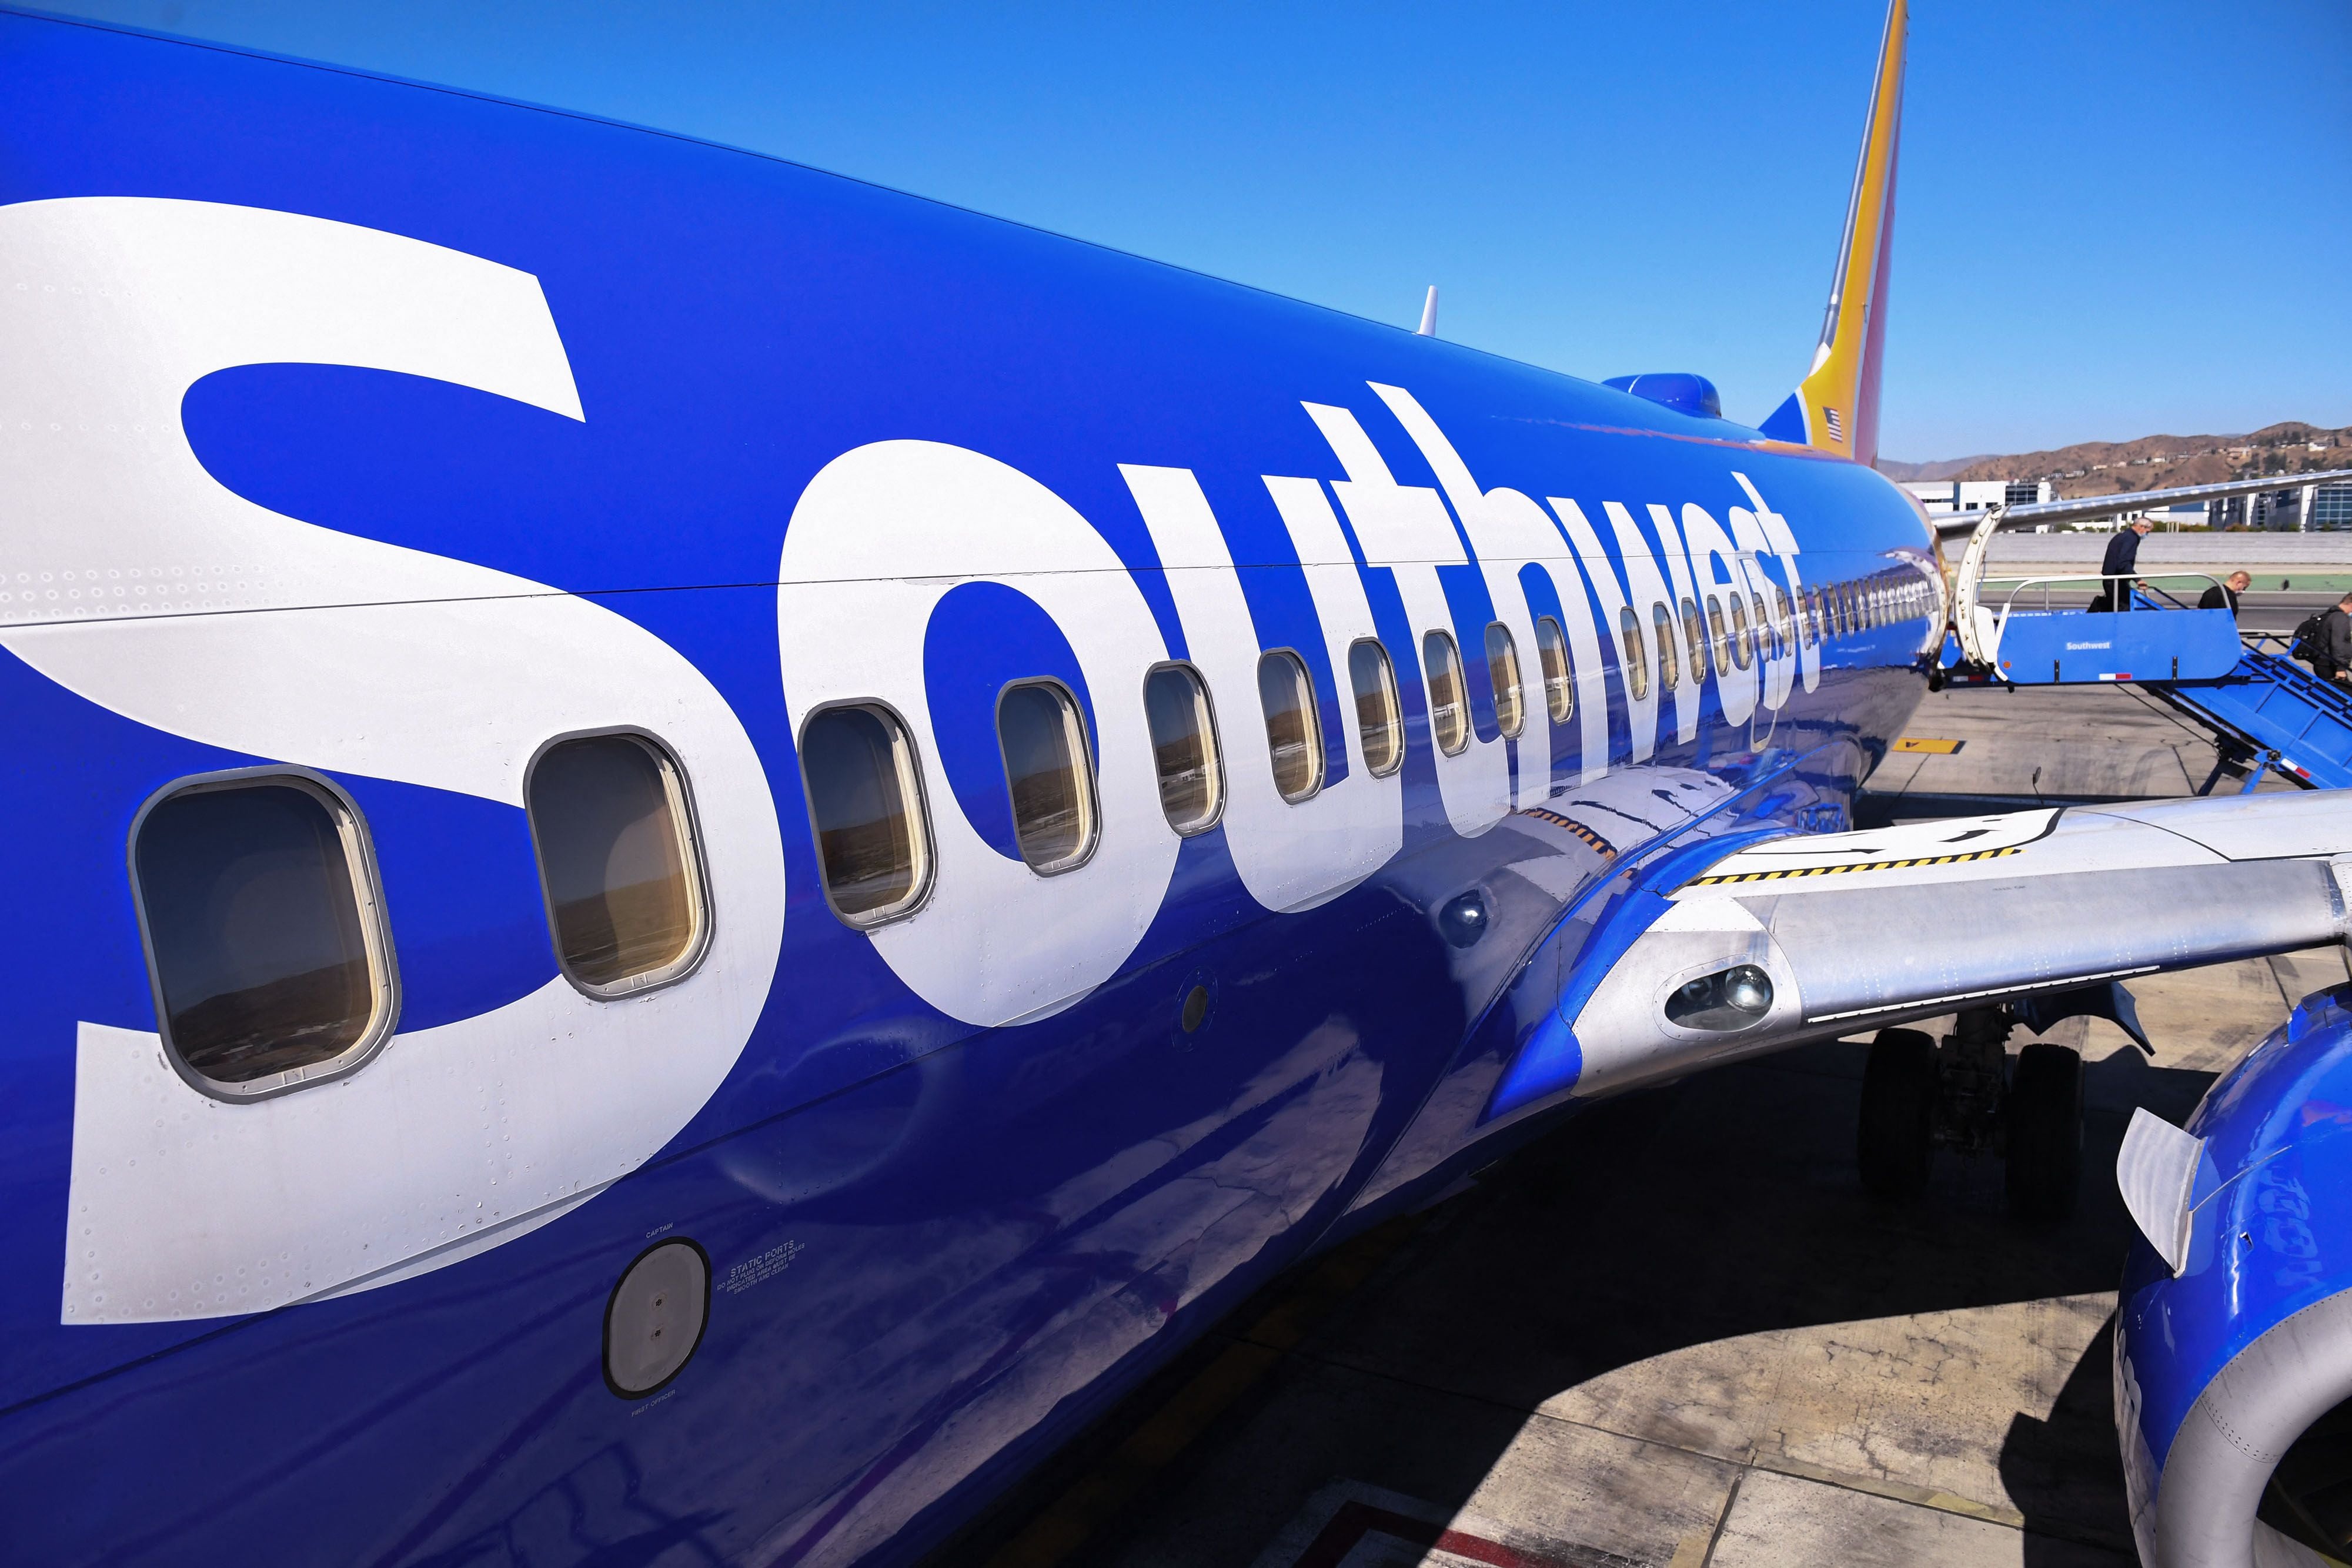 The incident occurred on a Southwest Airlines flight